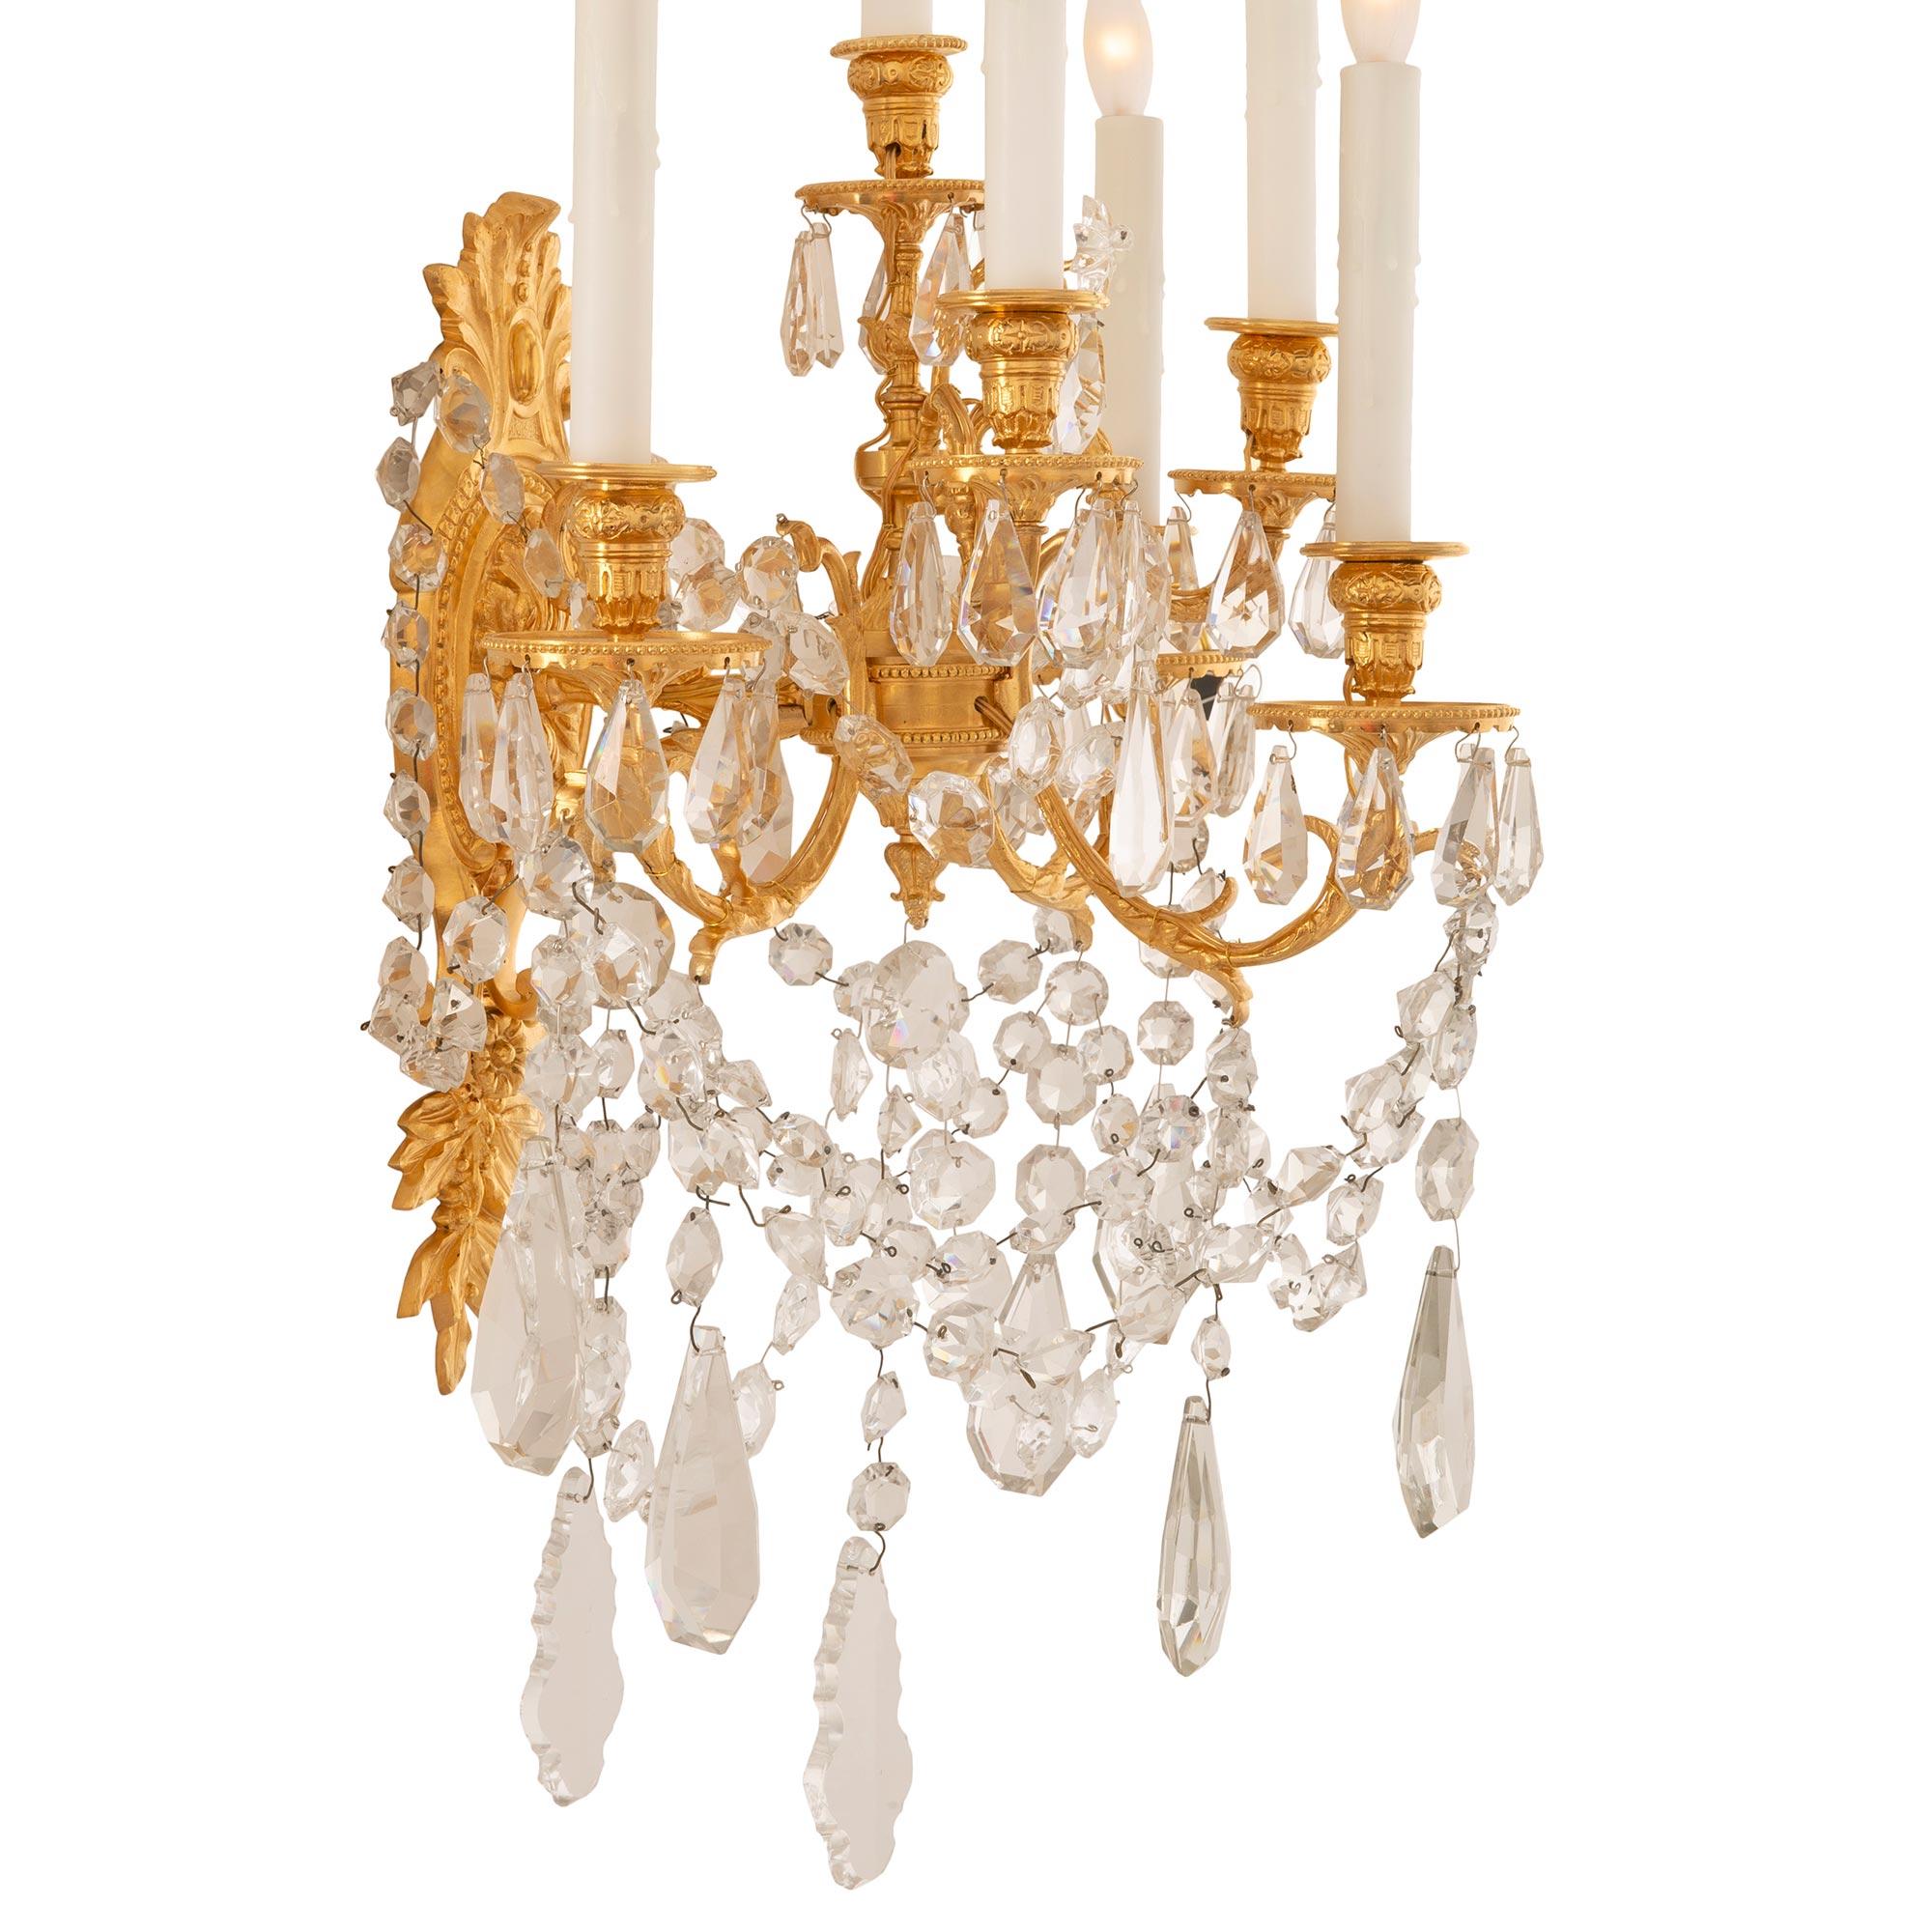 A stunning and most impressive pair of French 19th century Louis XVI st. ormolu and Baccarat crystal sconces. Each six arm sconce is centered by an exceptional and most decorative array of cut Baccarat crystal pendants amidst beautiful swaging